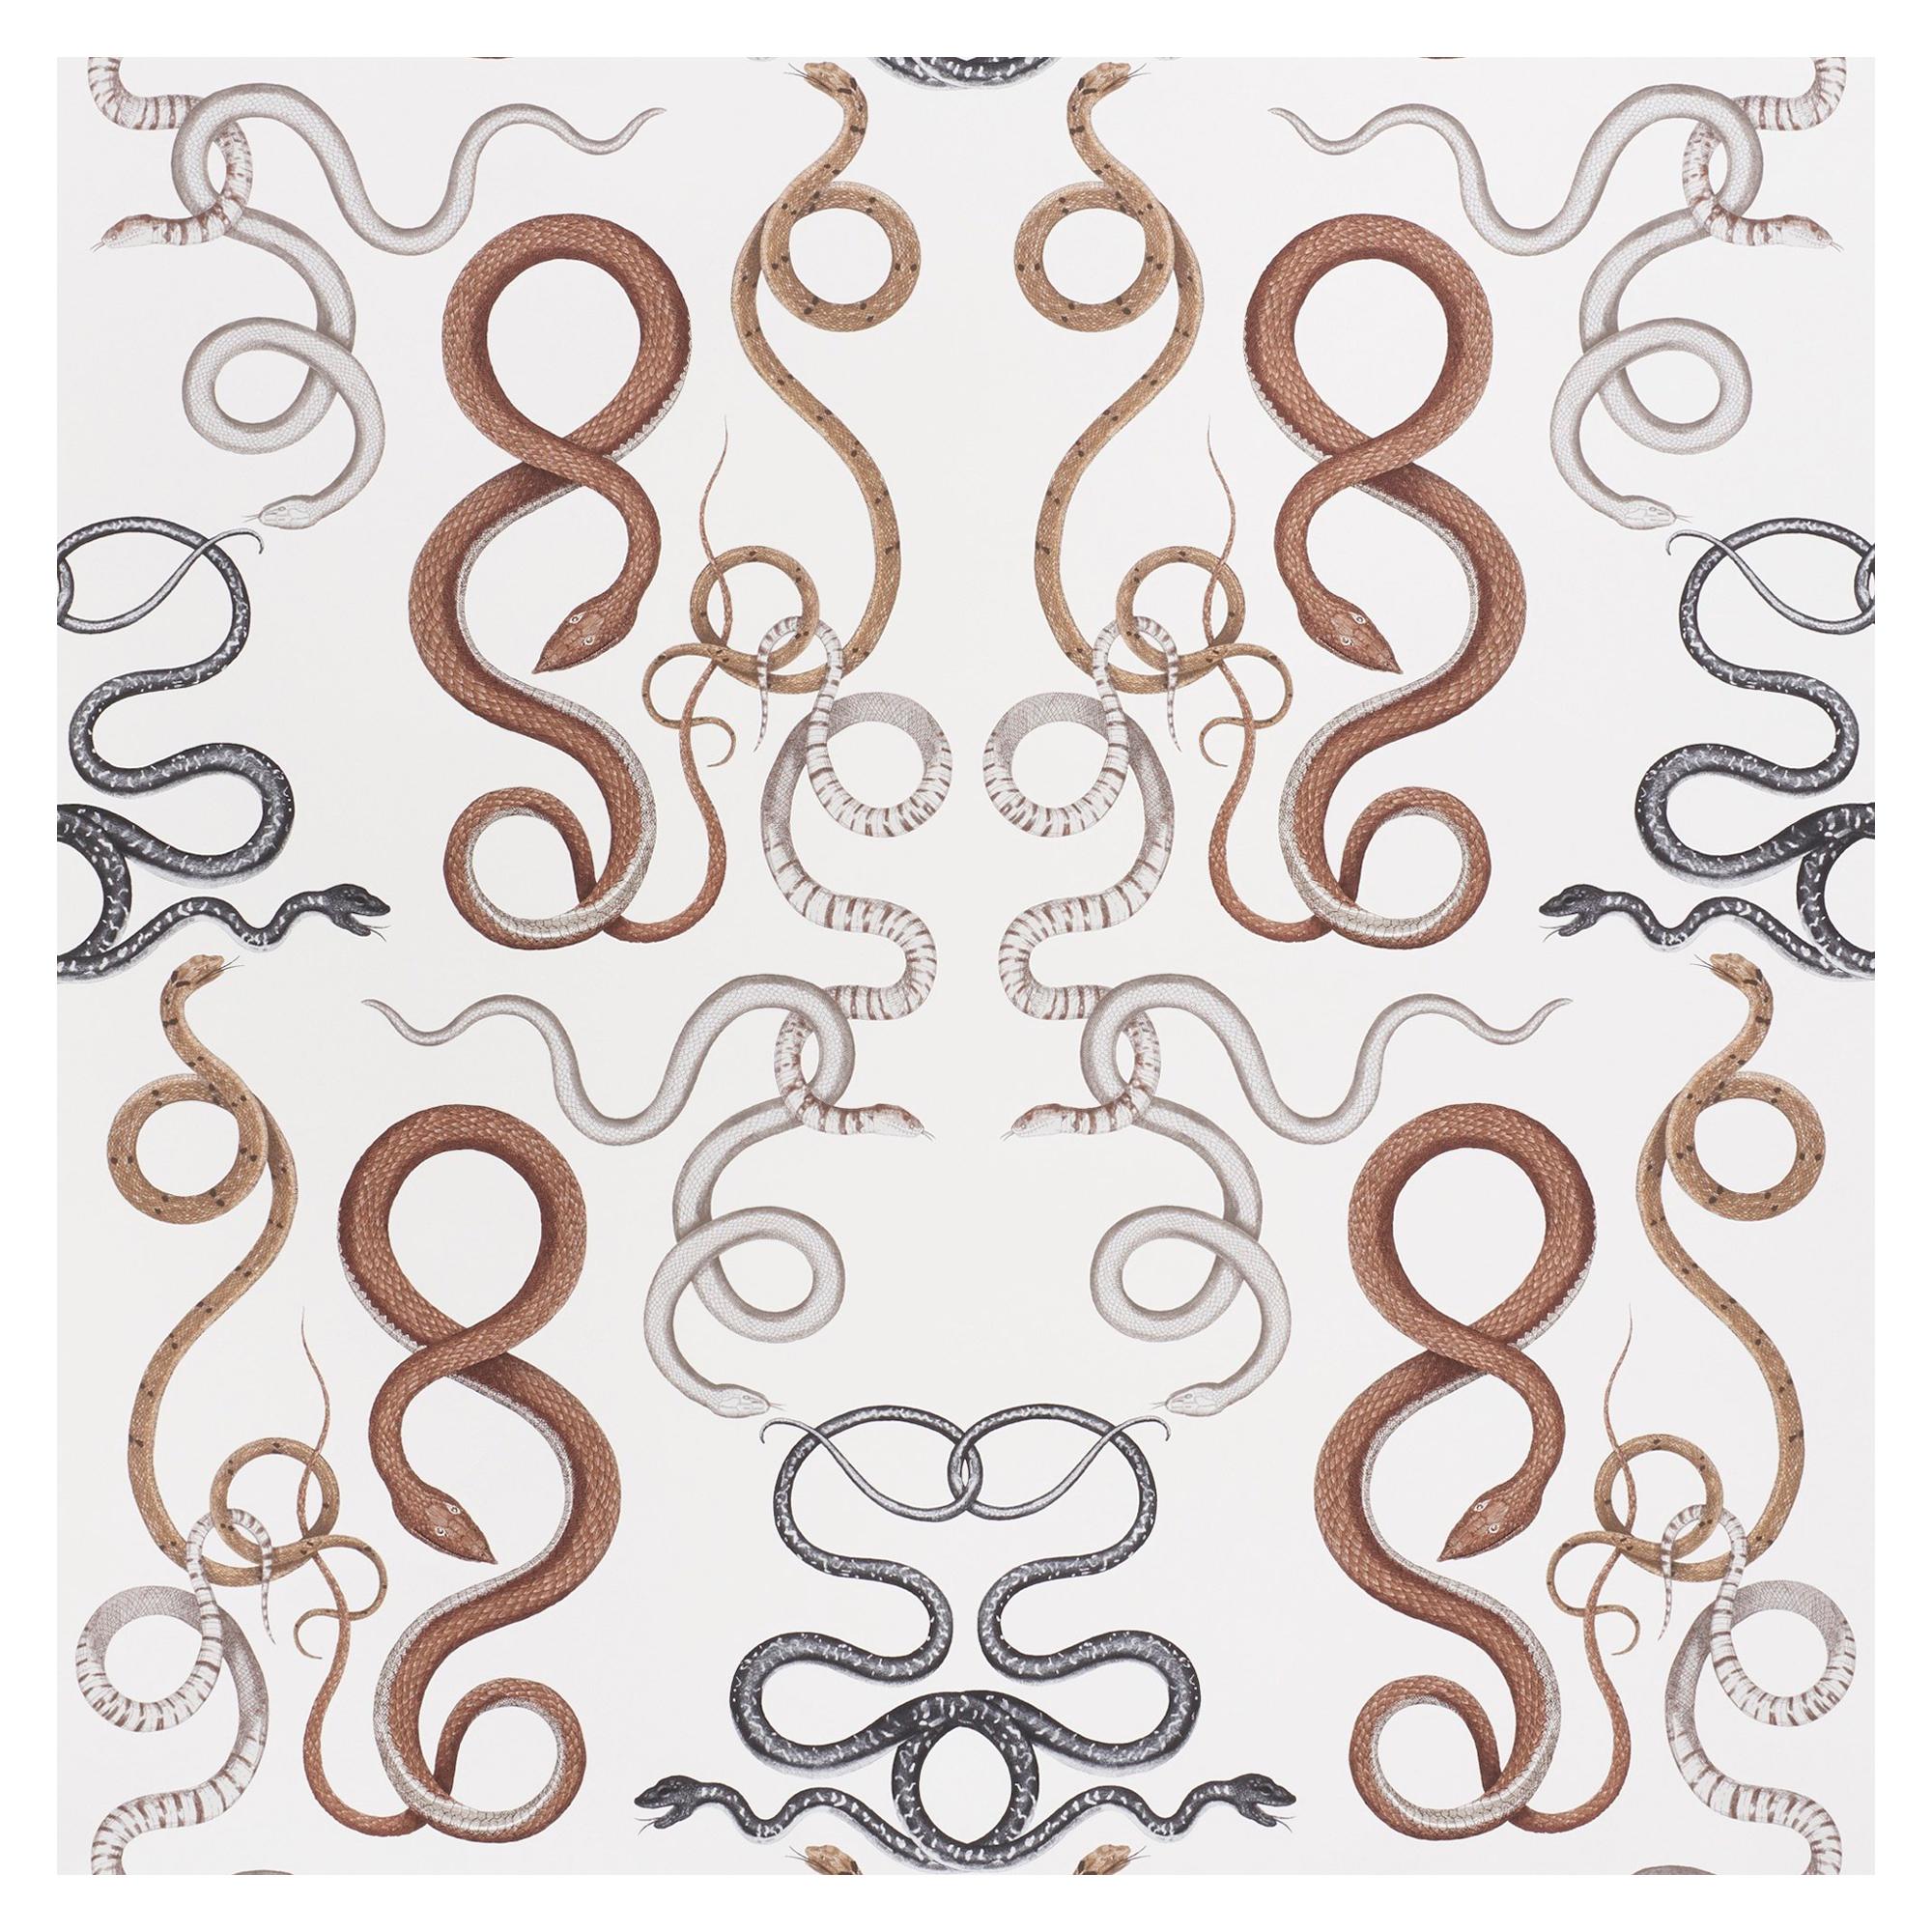 Schumacher Charlap Hyman Herrero Giove Wallpaper in Agate and Onyx For Sale